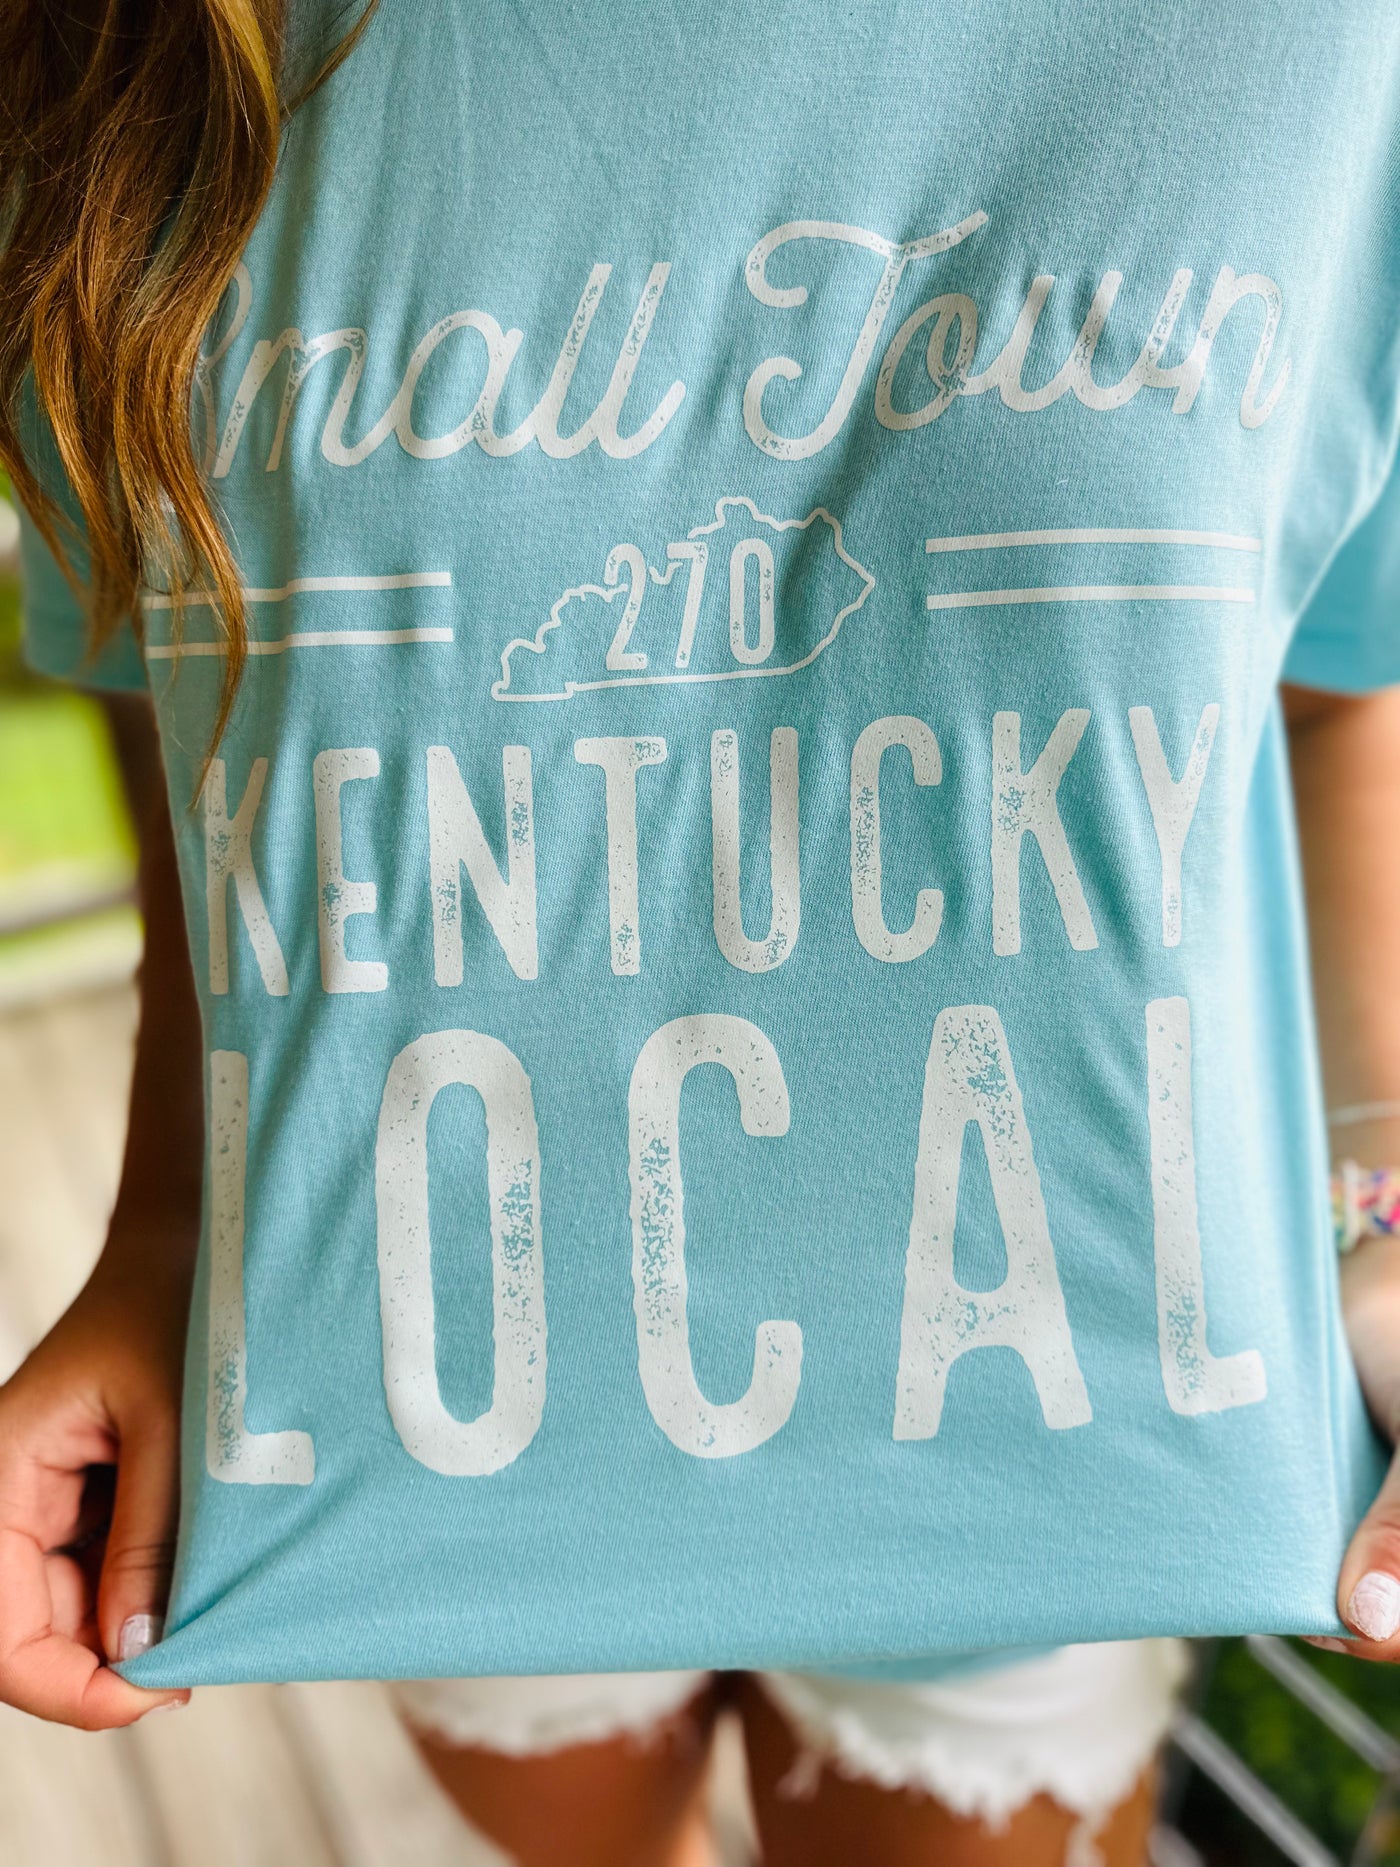 "Small Town 270 KY Local" Tee in Purist Blue